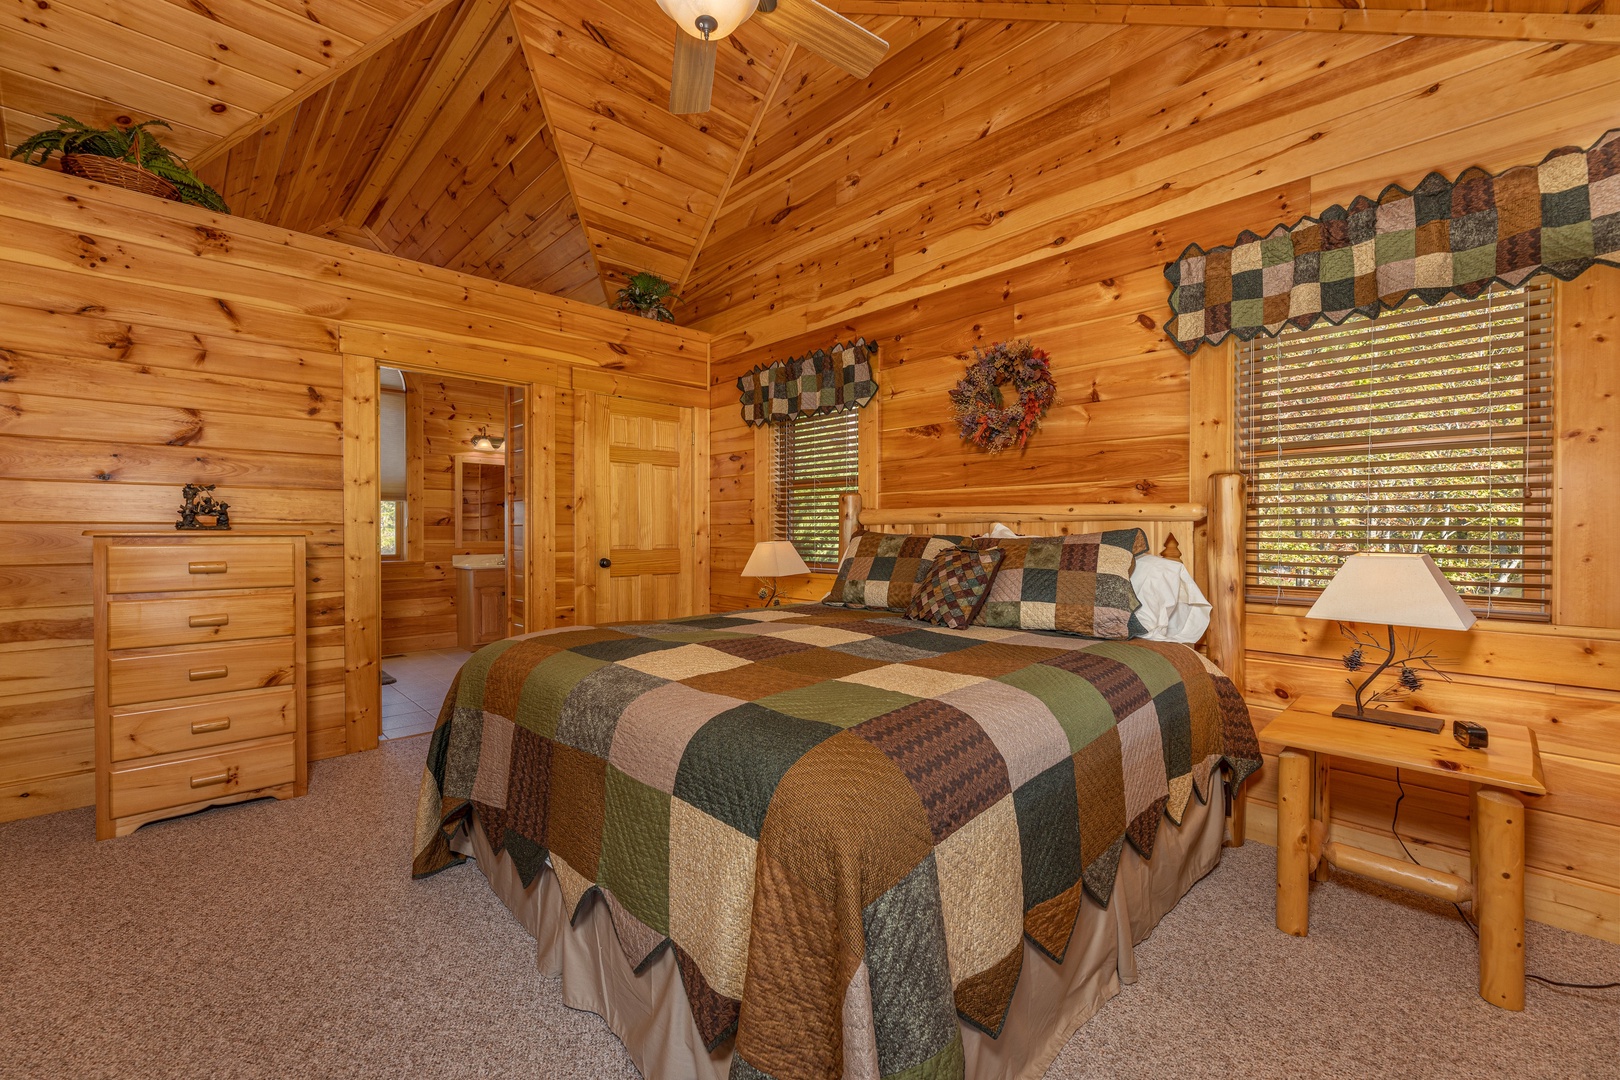 Bedroom with dresser, two night stands, and lamps at Sensational Views, a 3 bedroom cabin rental located in Gatlinburg